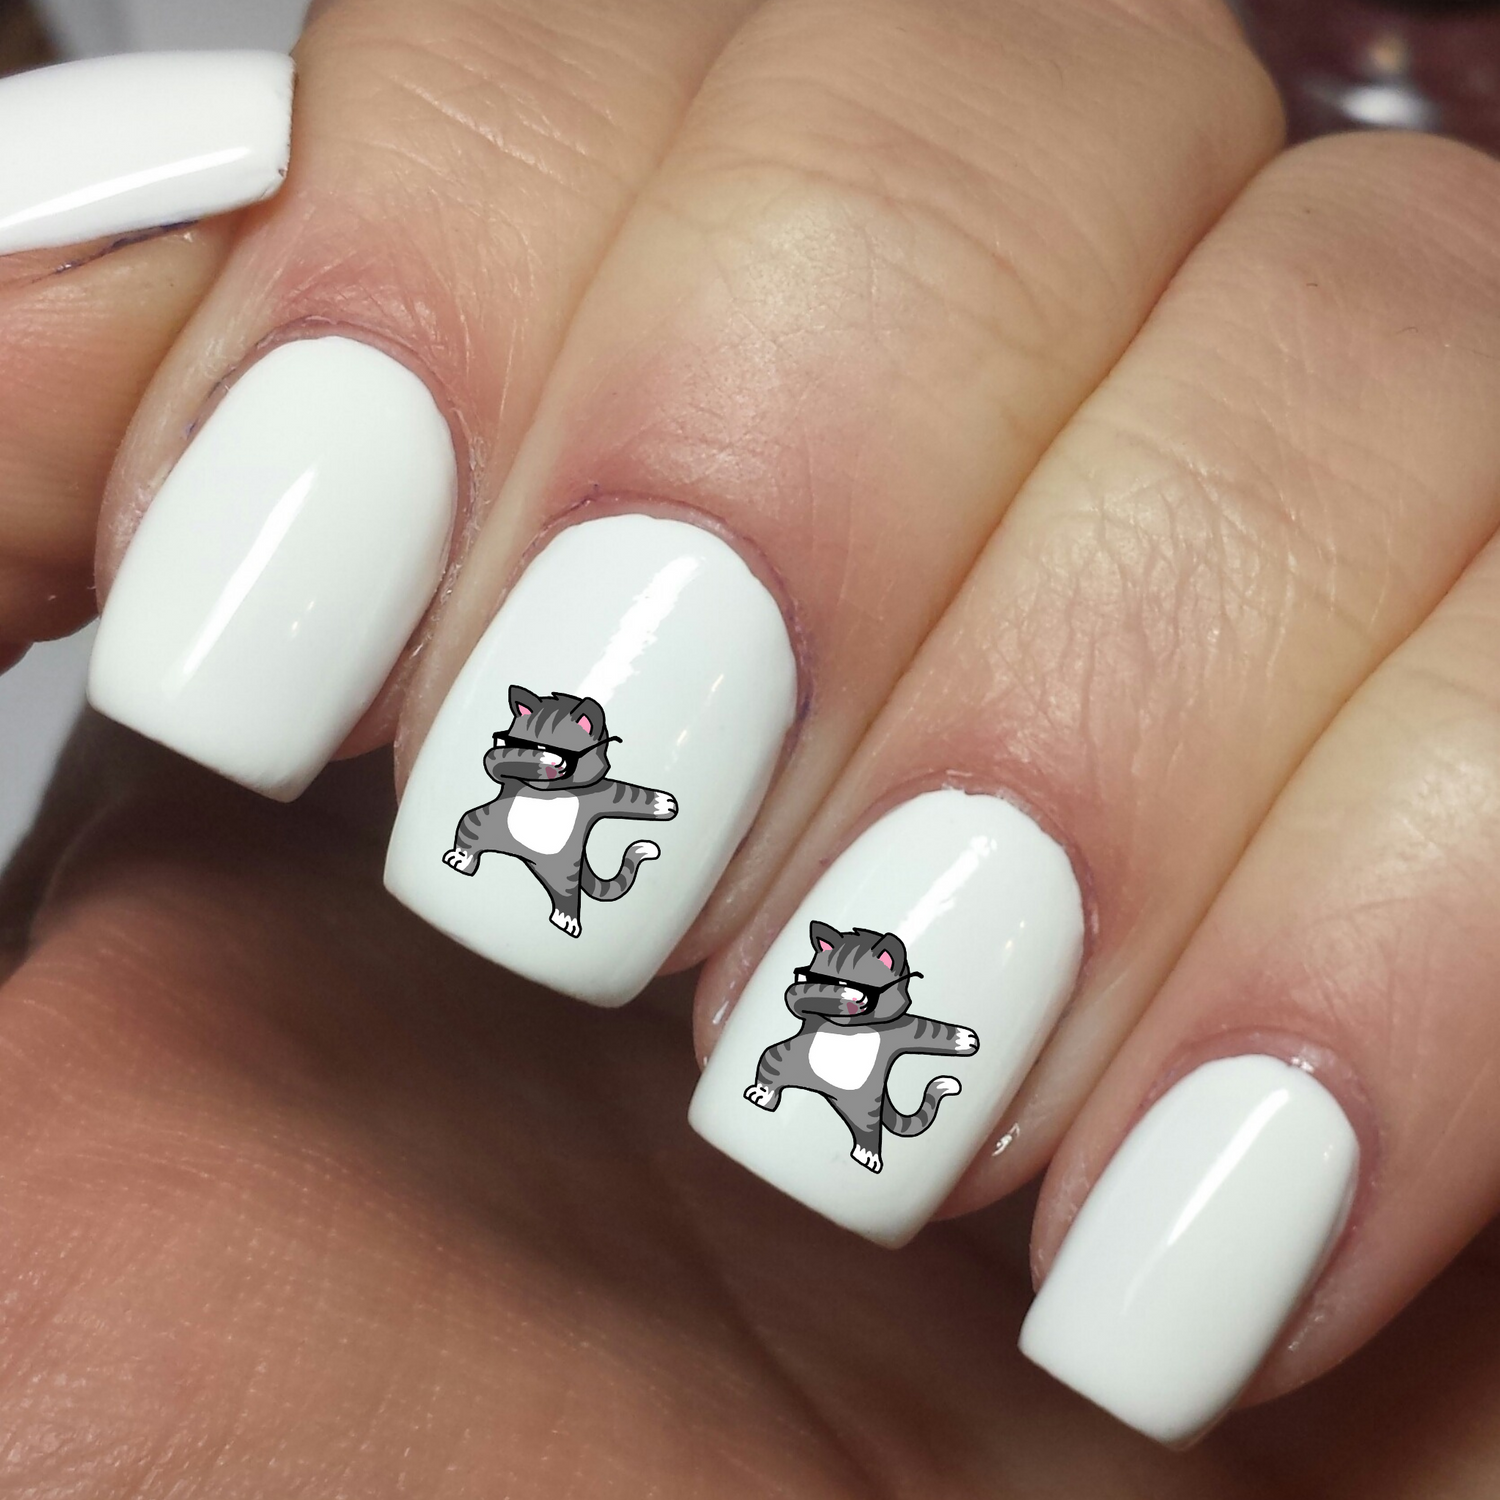 Kitten Cat dab Nail Art Waterslide Decals - Nails Creations - Nails Creations